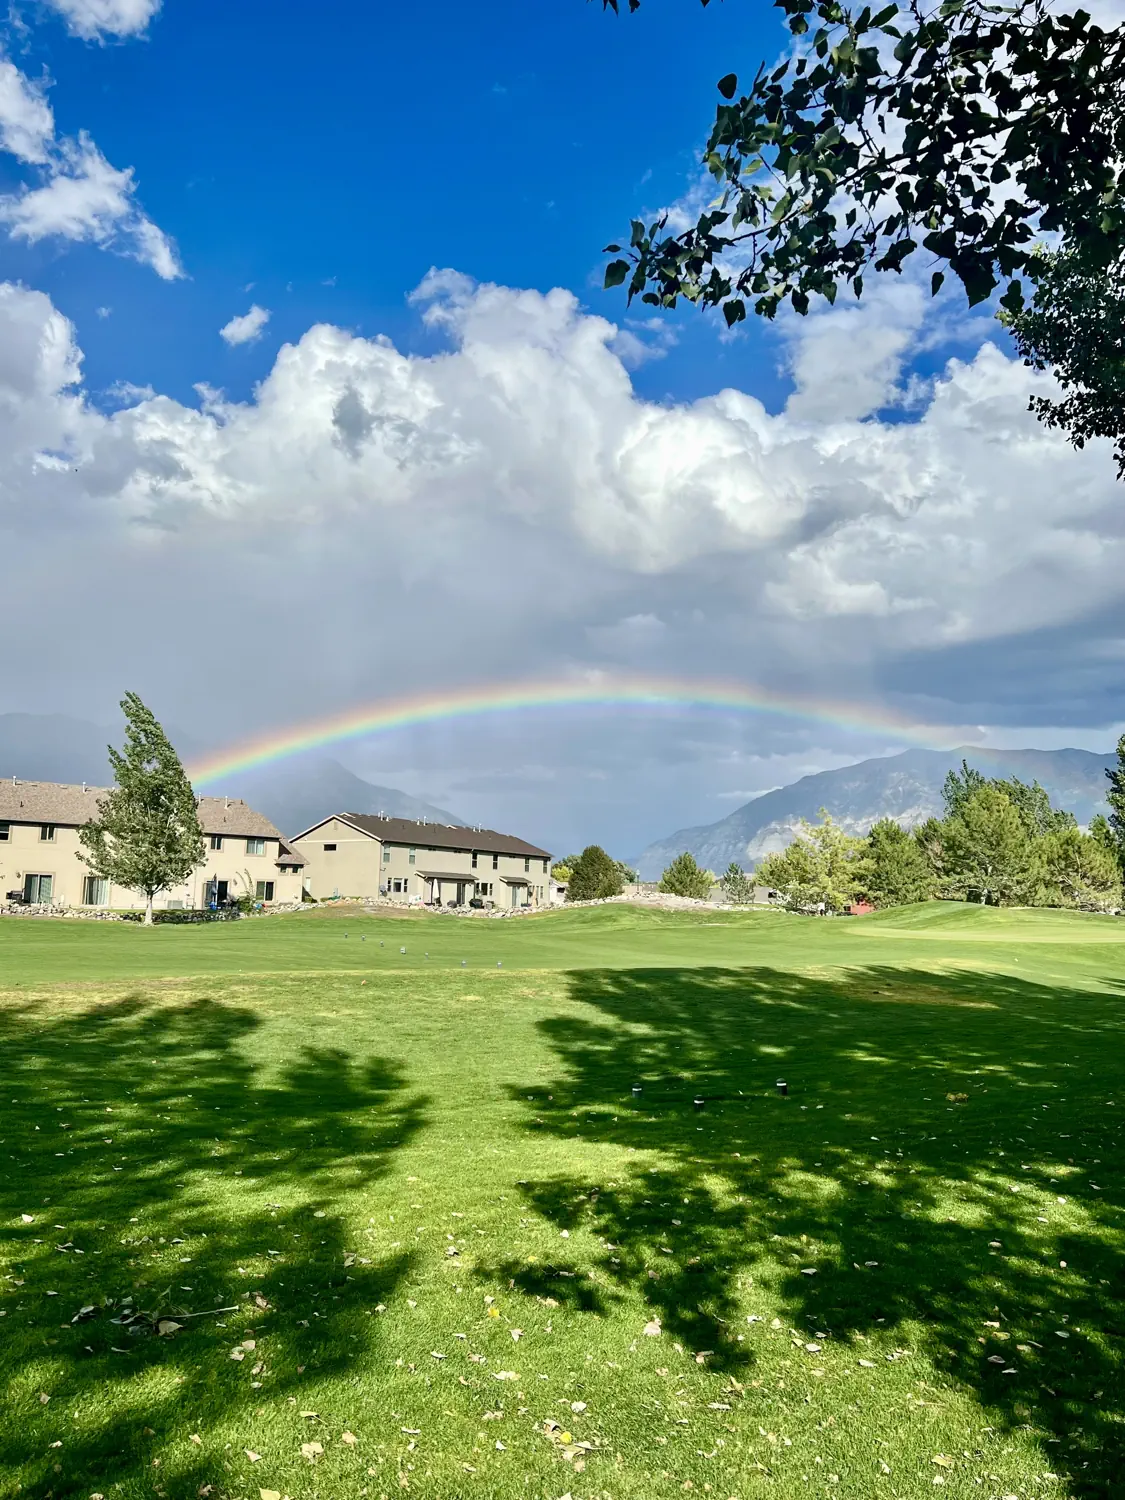 Storm over the Wasatch Mountains with a rainbow. This is the view from our house.